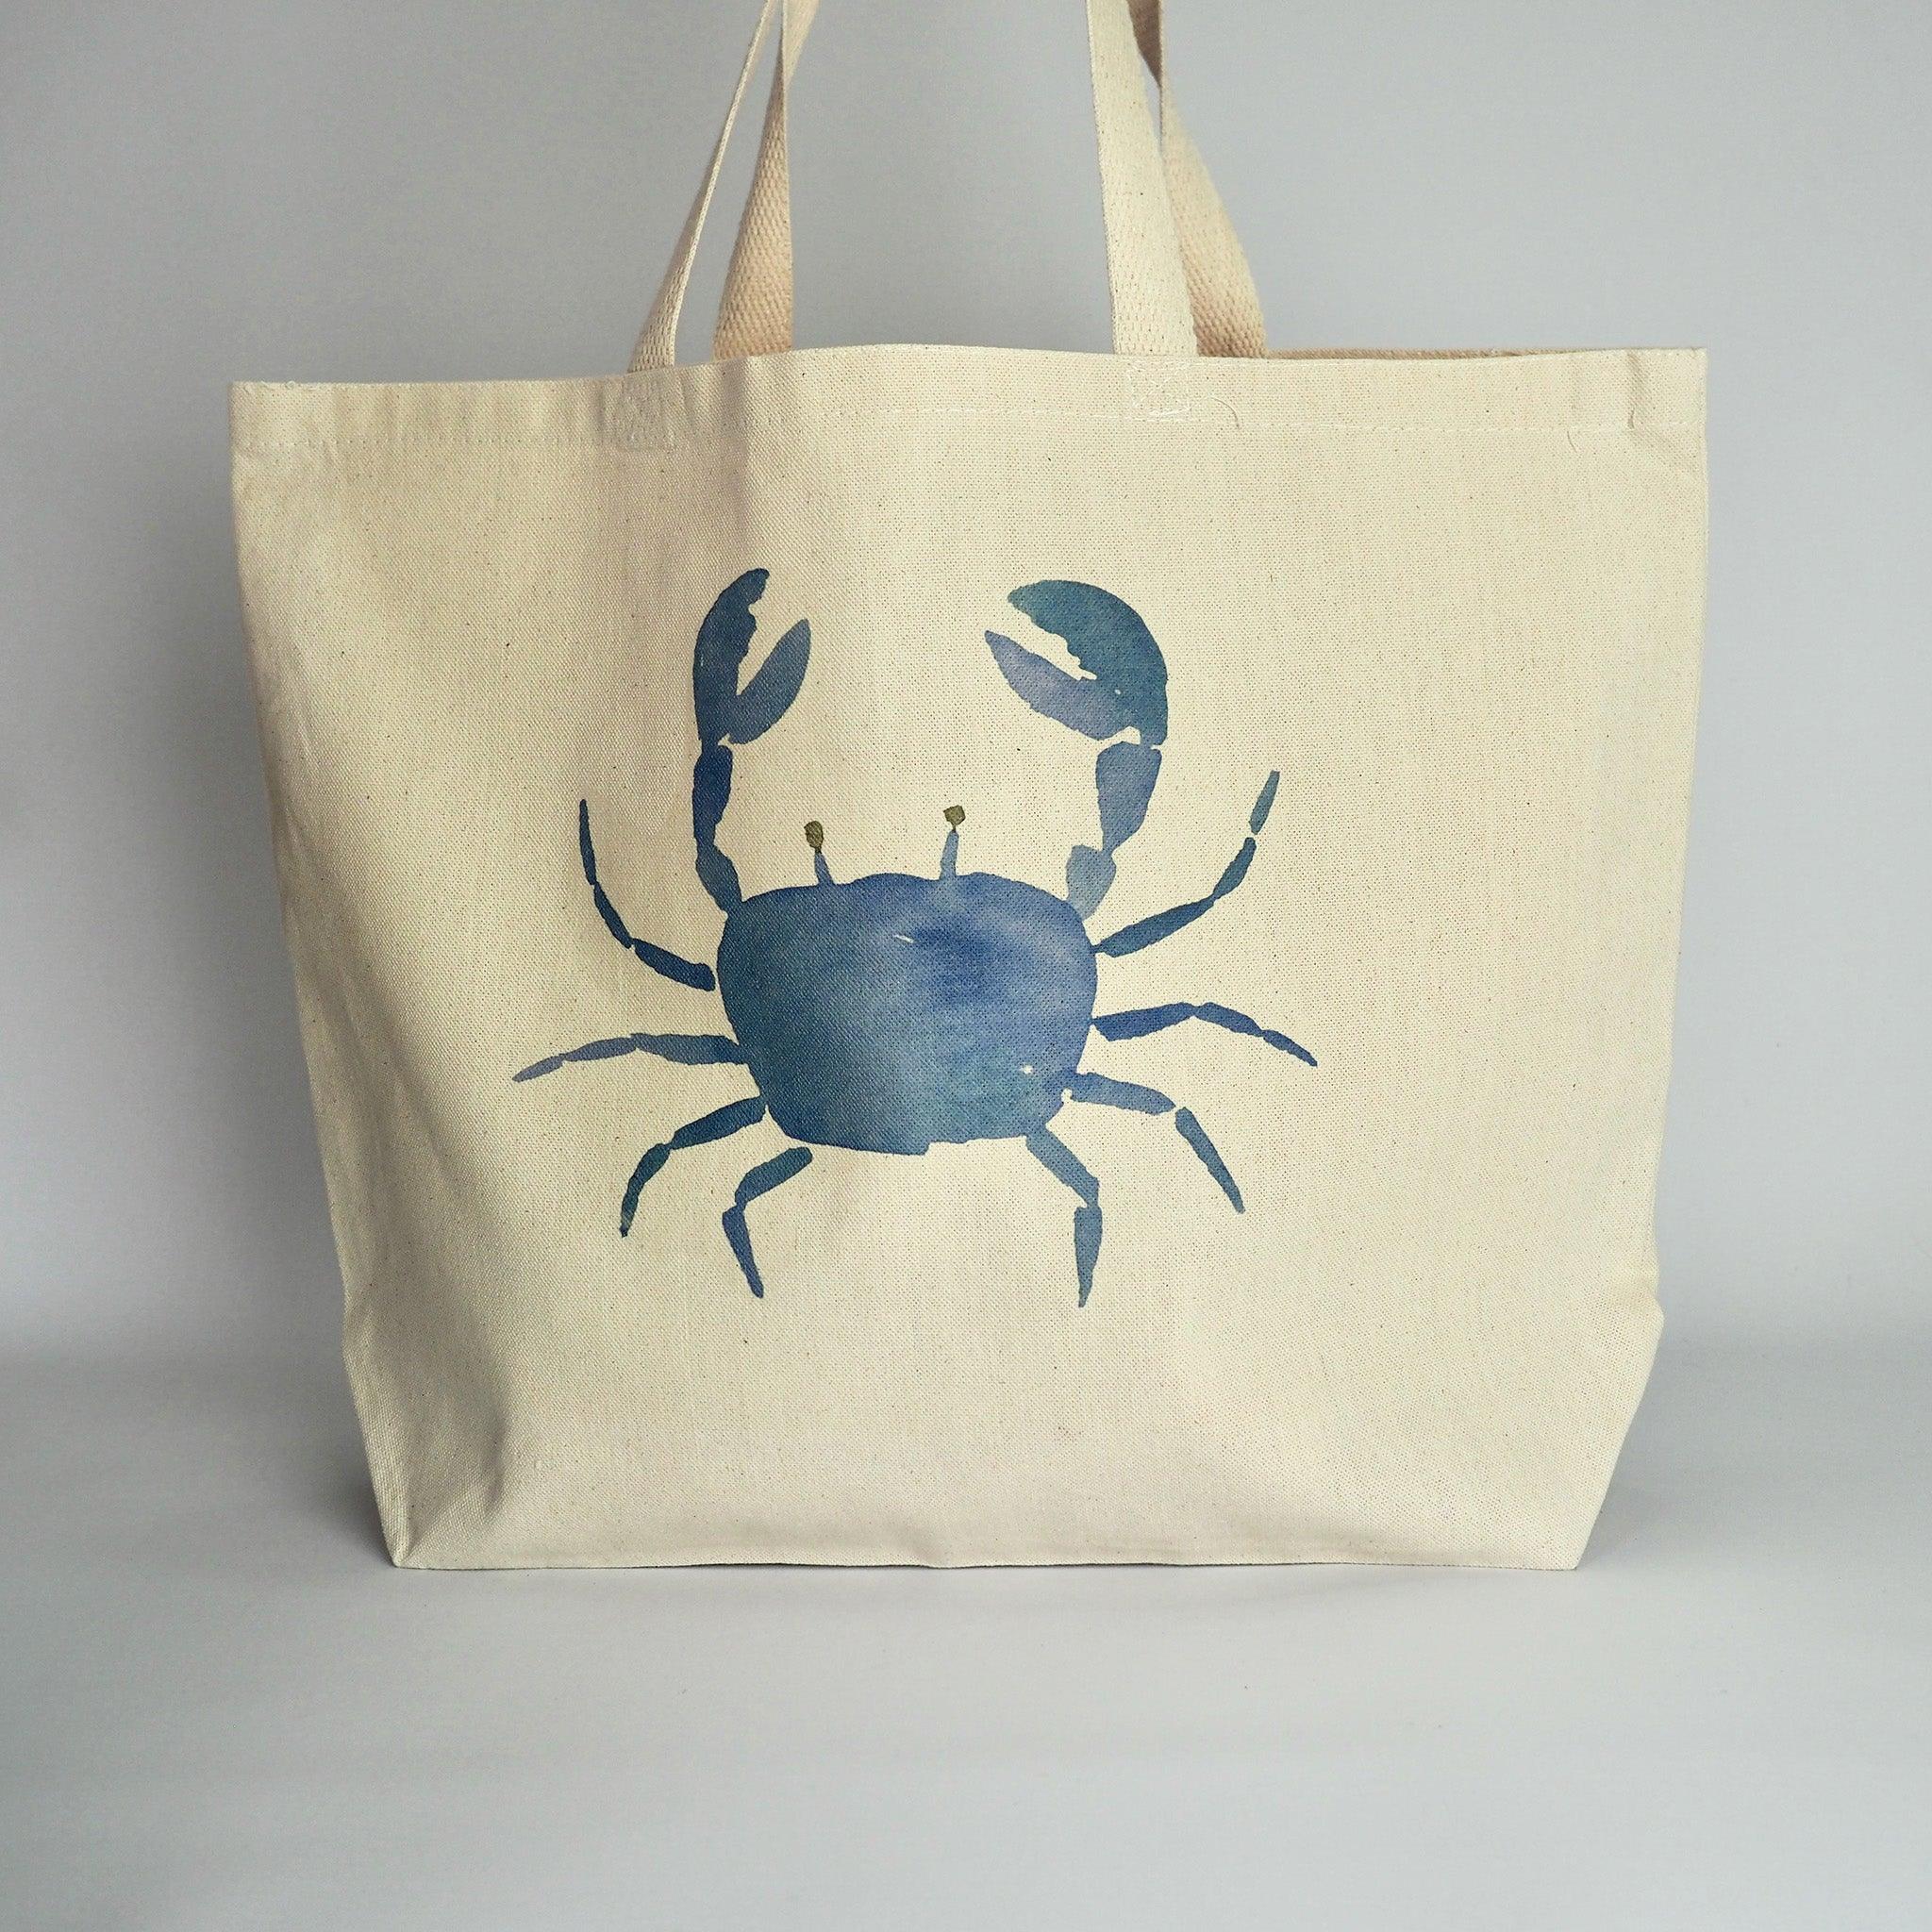 XL Canvas Tote Bag with a fun crab print design on front in blue.